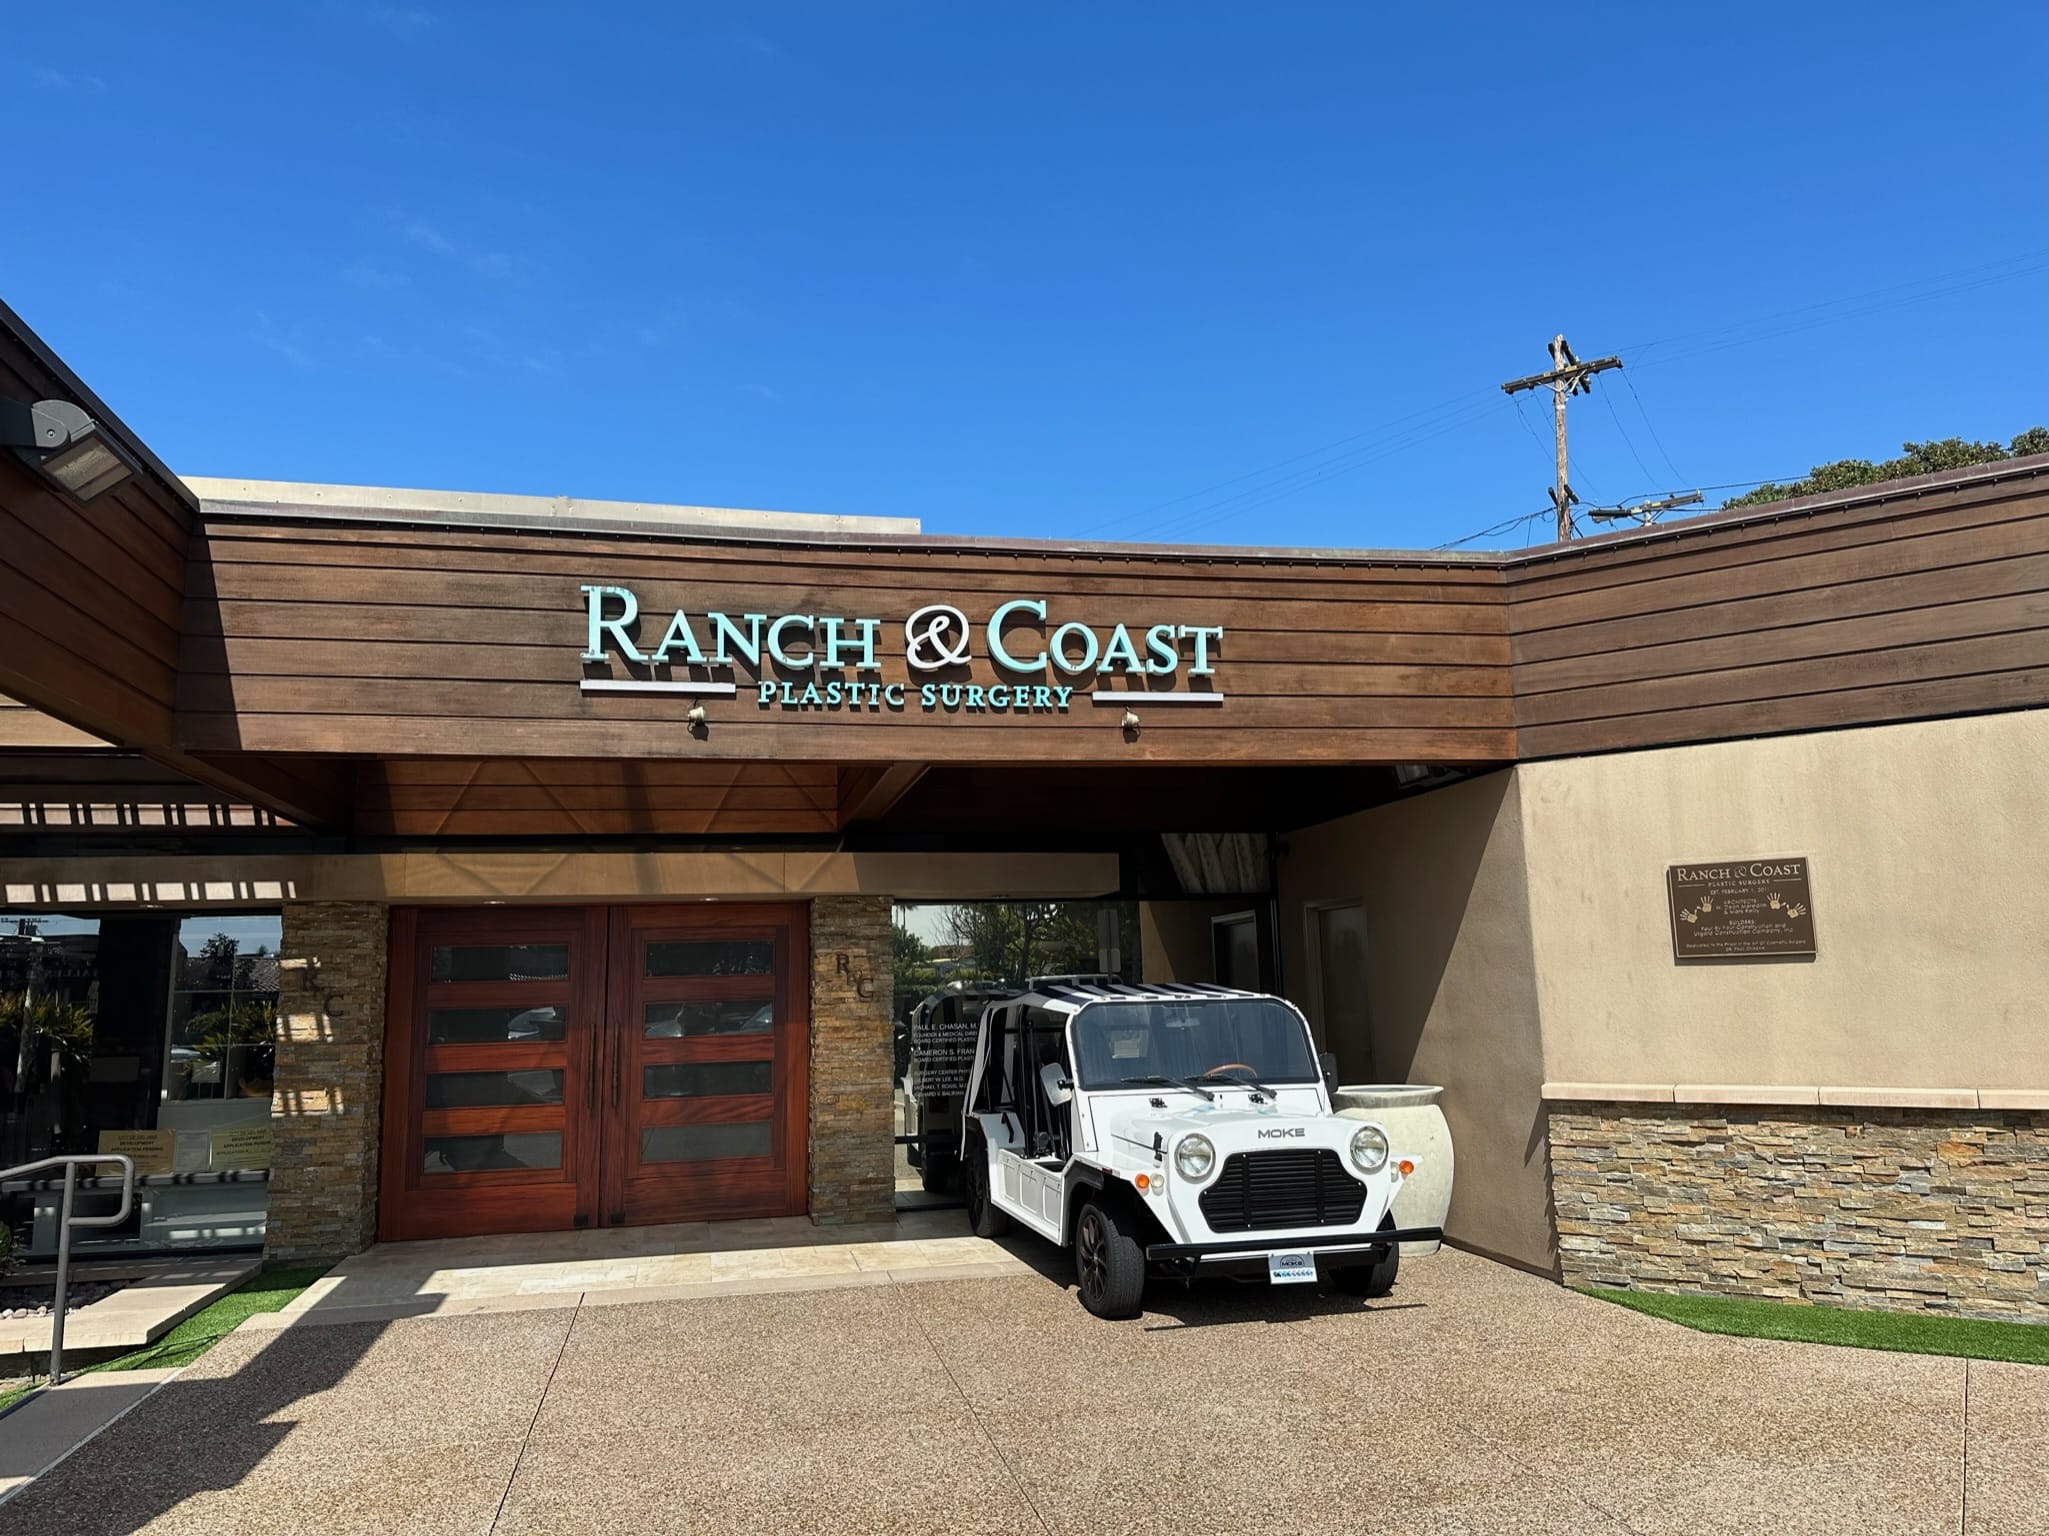 View of Ranch & Coast Plastic Surgery and nearby storefronts